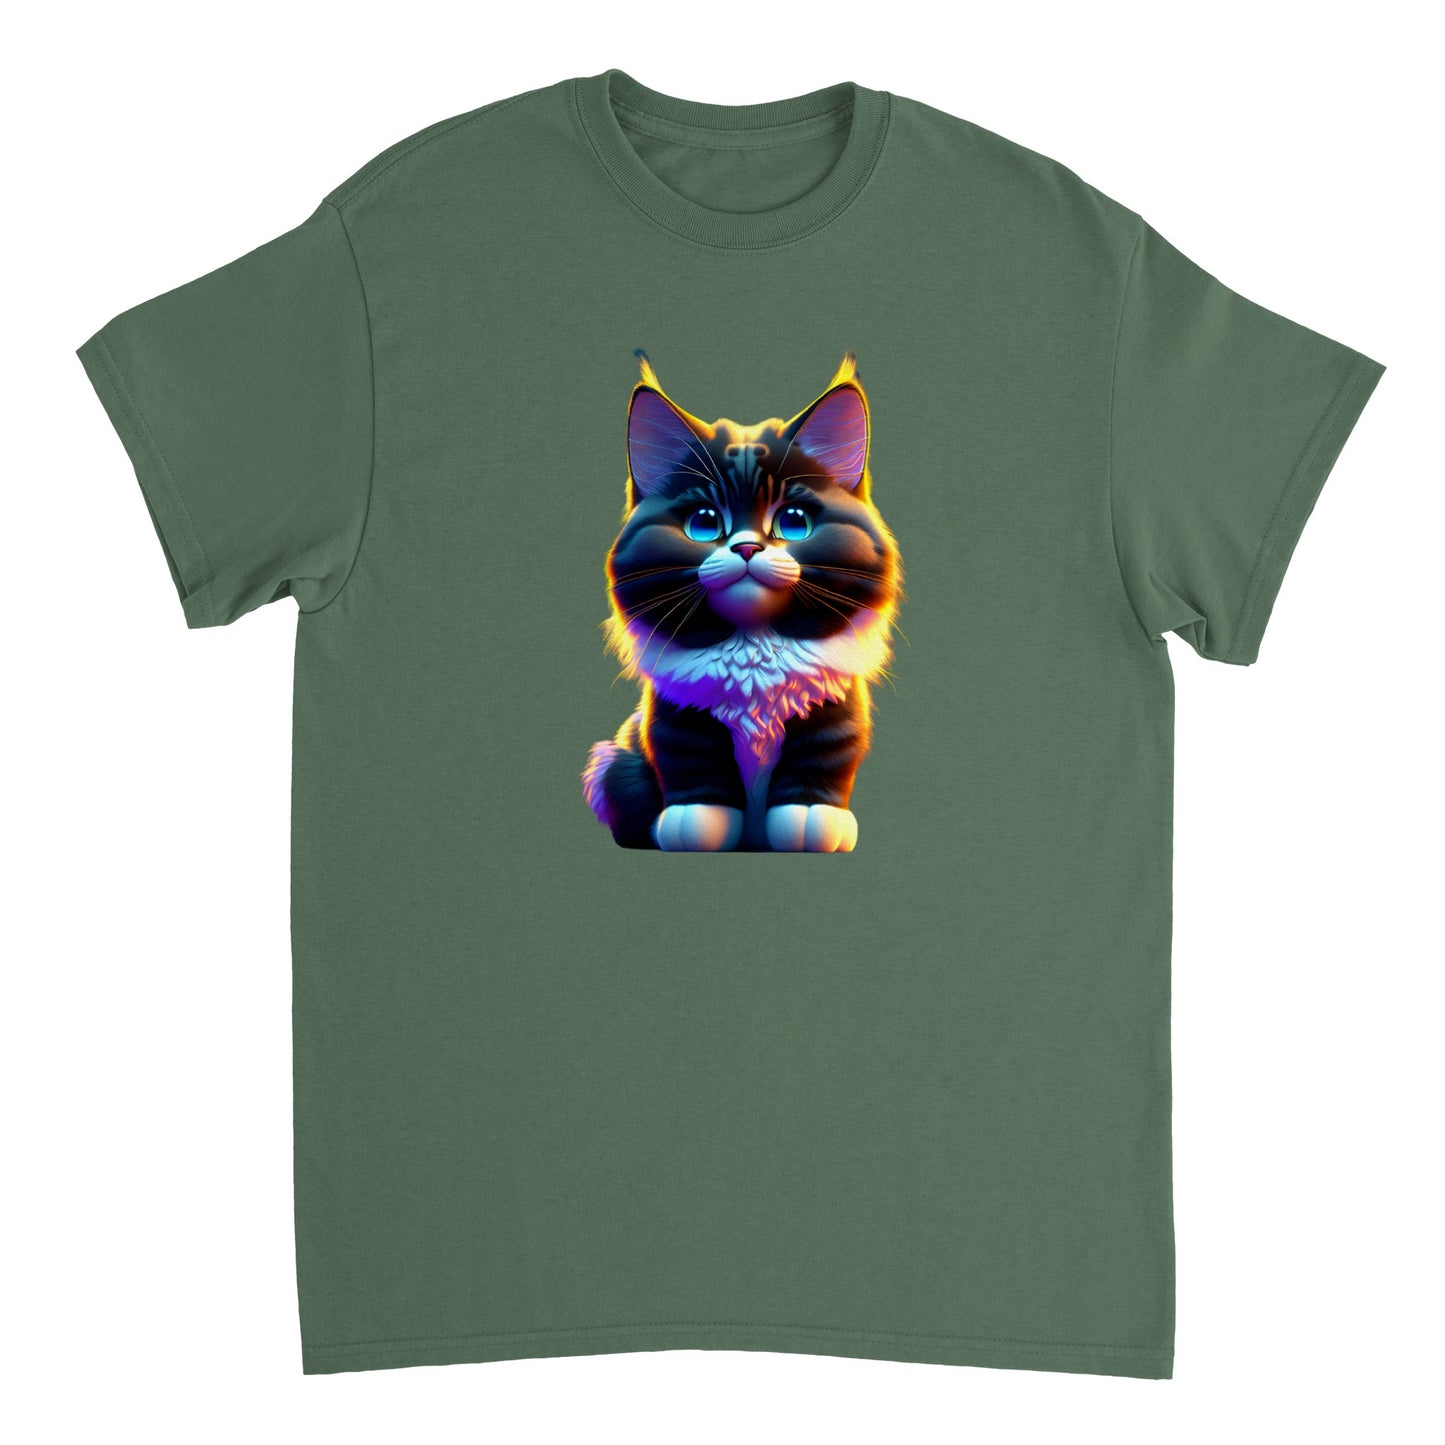 Adorable, Cool, Cute Cats and Kittens Toy - Heavyweight Unisex Crewneck T-shirt 1